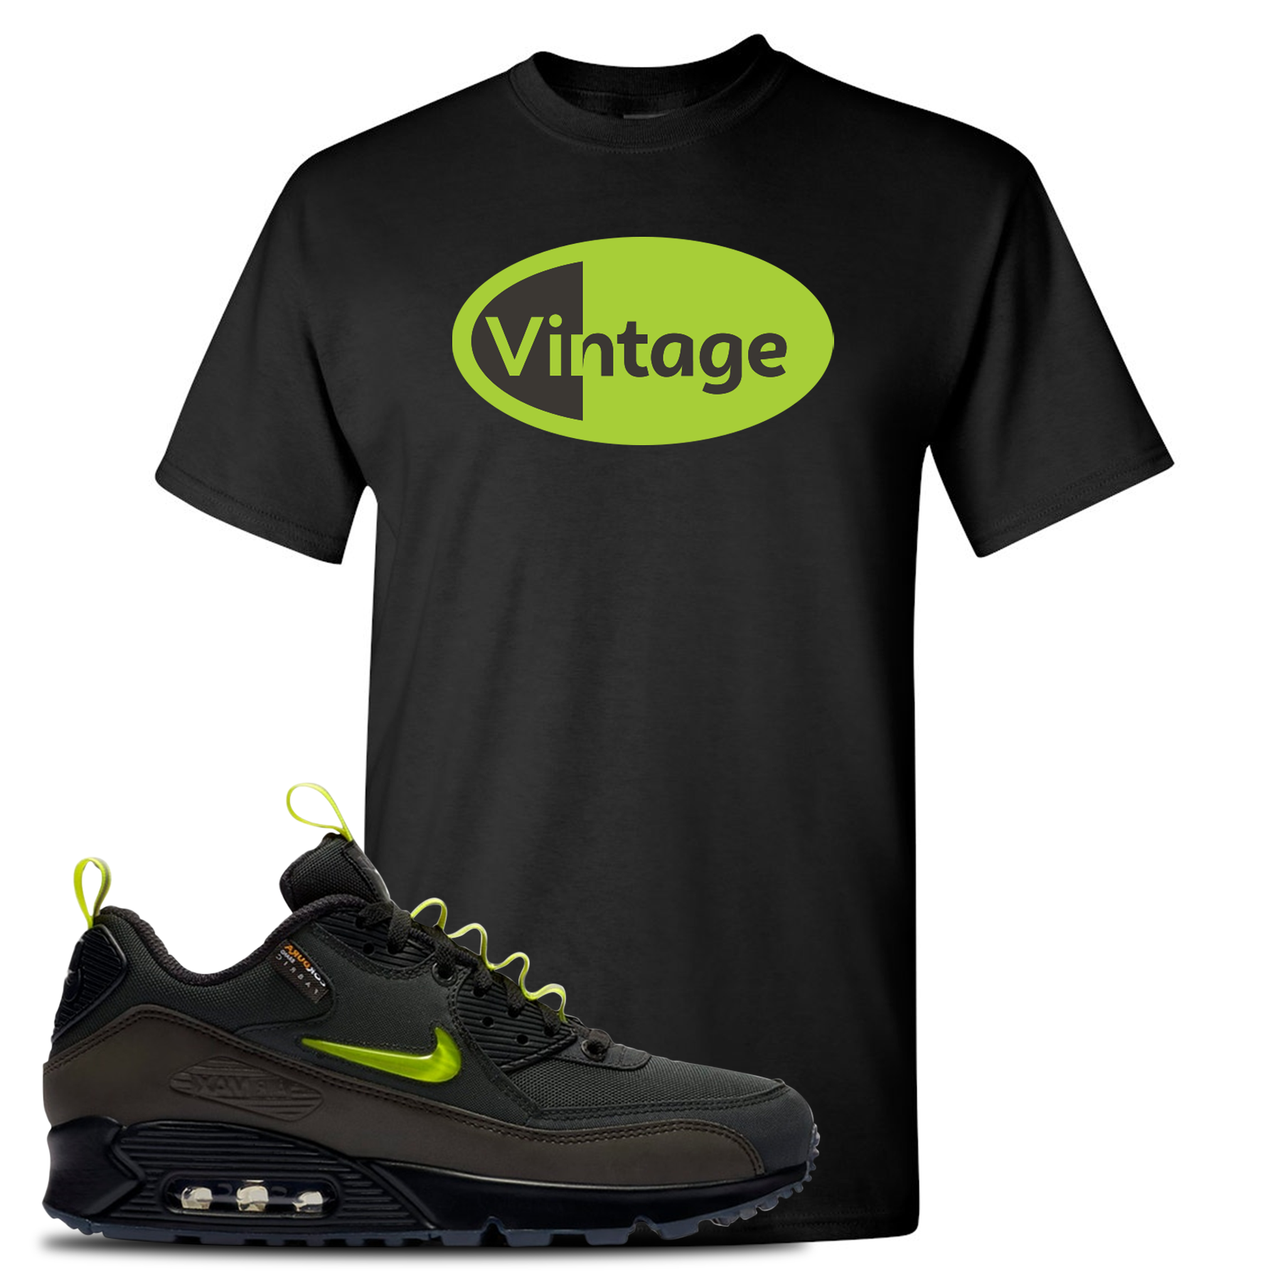 The Basement X Air Max 90 Manchester Vintage Oval Black Sneaker Hook Up T-Shirt